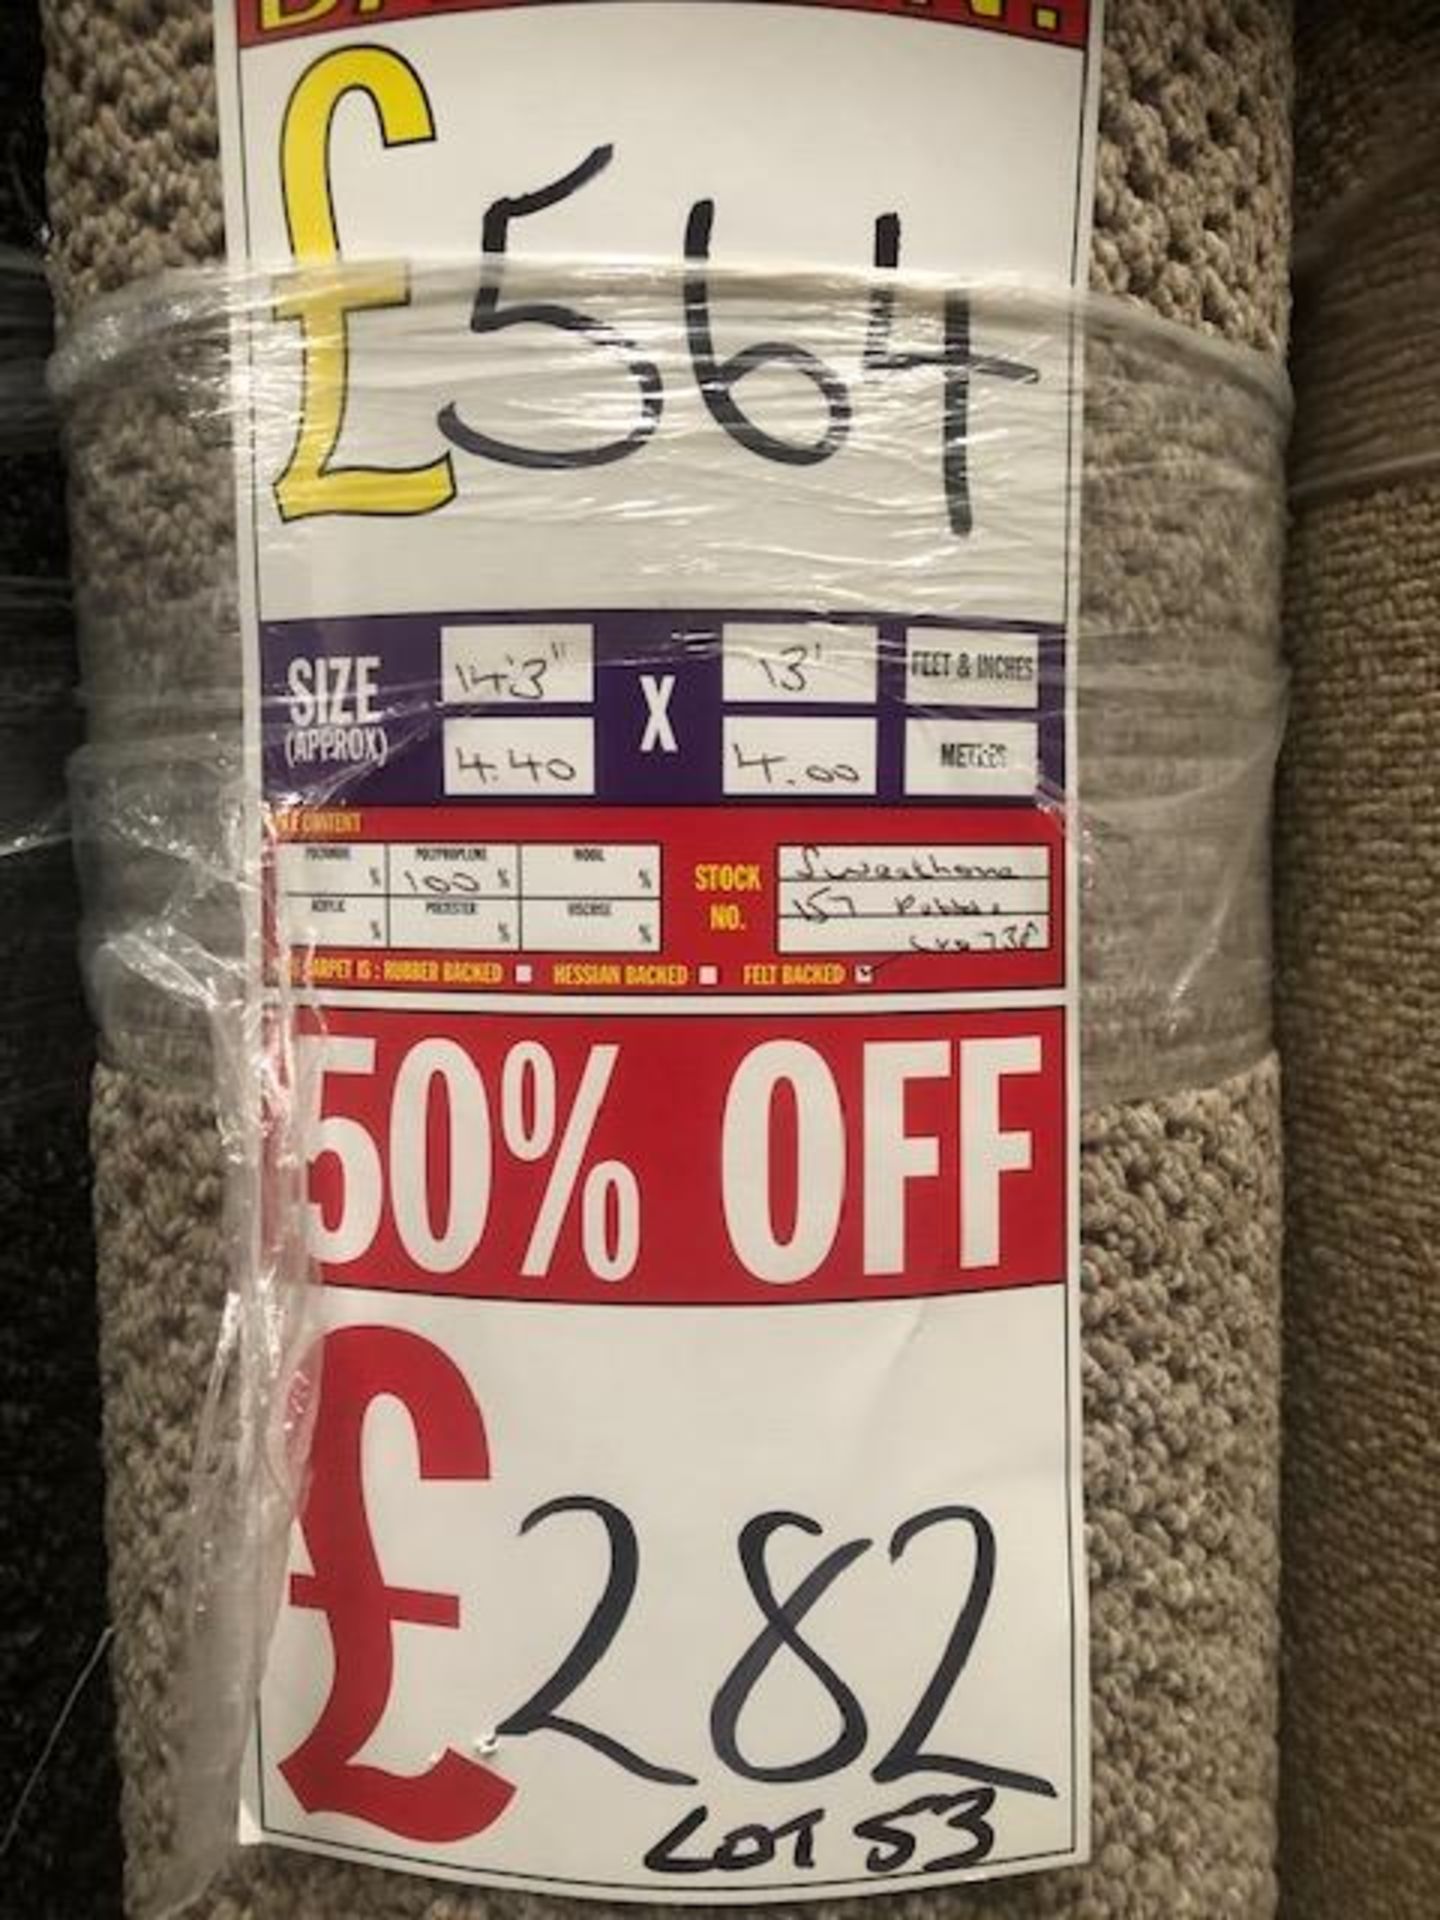 Lot 53 Sweethome Pebble 4.4M X 4M (14Ft 3In X 13Ft ) Polypropylene Loopcontract Feltback Carpet - Image 2 of 2